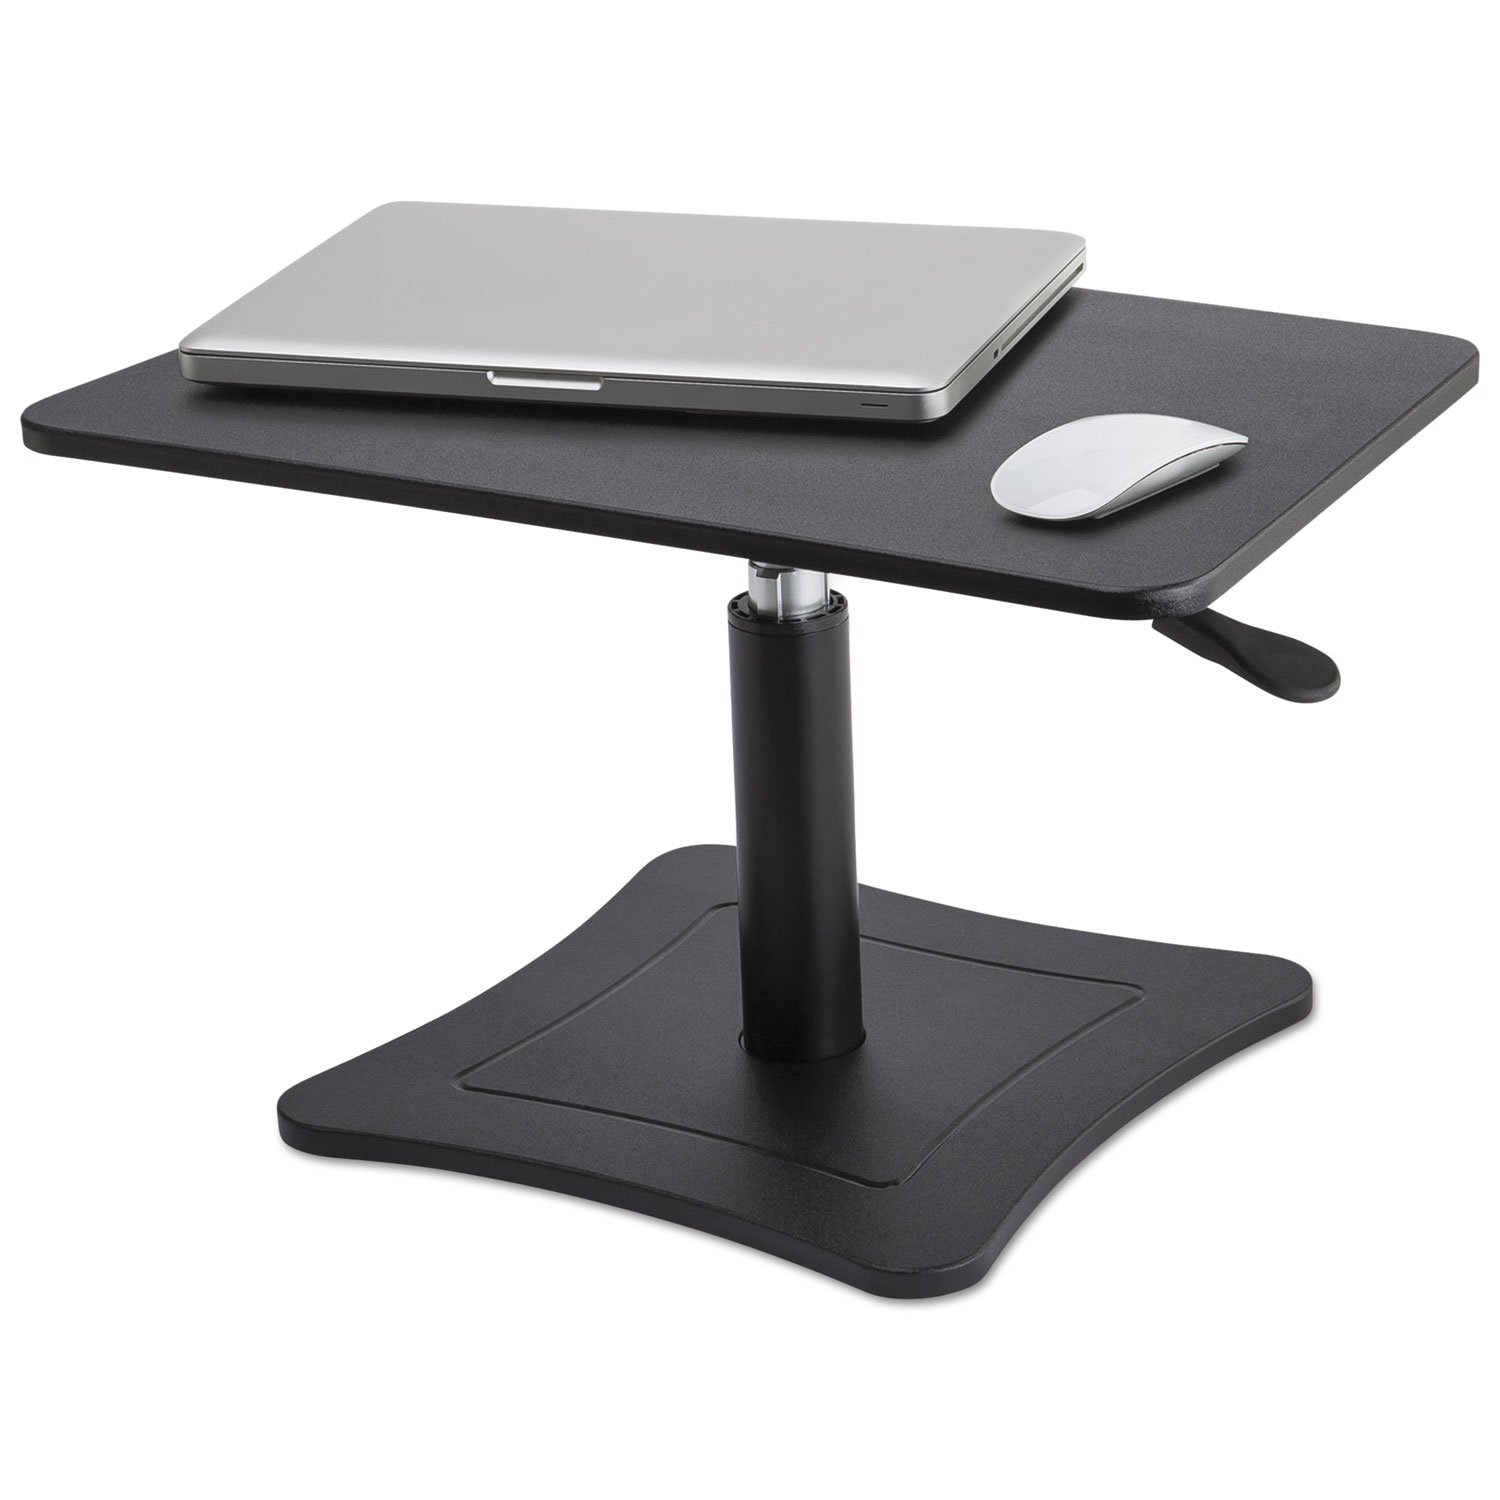  Victor DC230B High Rise Adjustable Laptop Stand, 21 x 13 x 12 to 15 3/4, Black (VCTDC230B) 